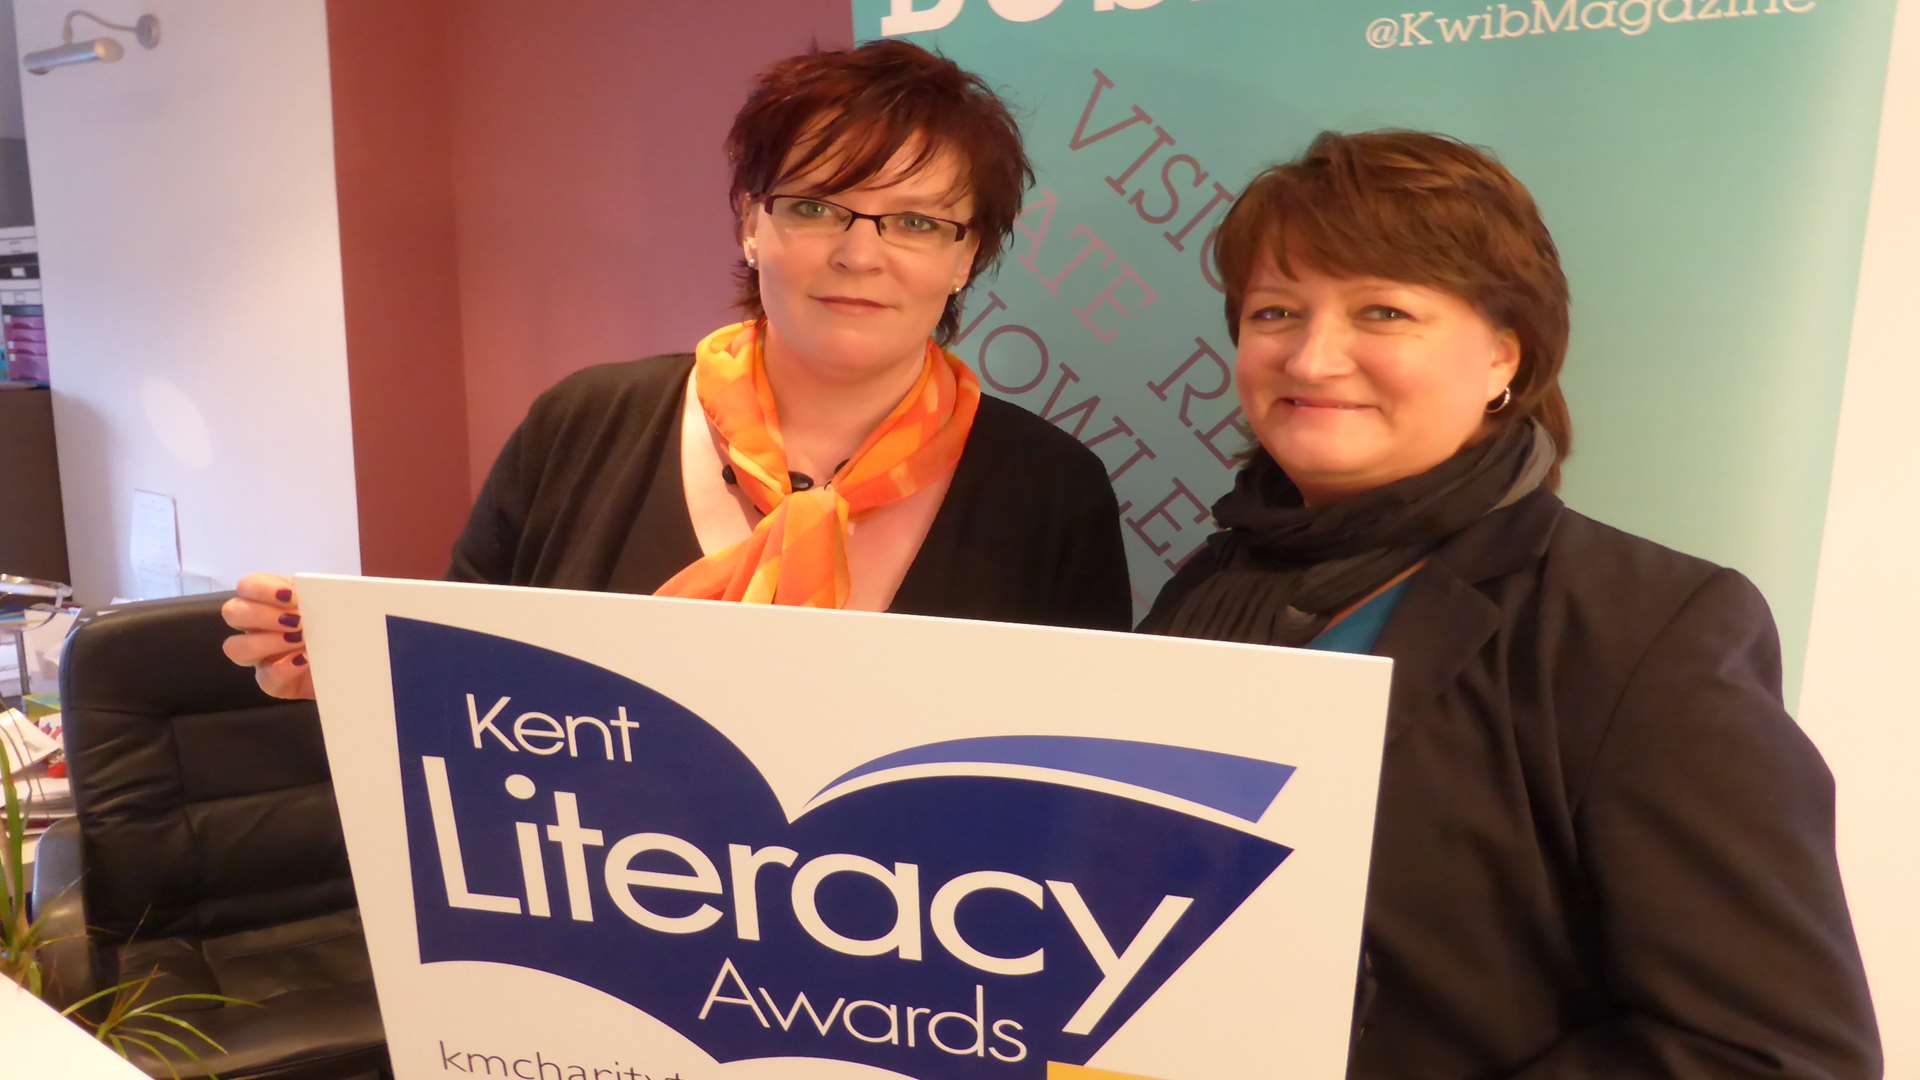 Hilary Steel and Sue Smith of Kent Women in Business magazine announce support for Kent Literacy Awards 2016 which are now open for nominations.